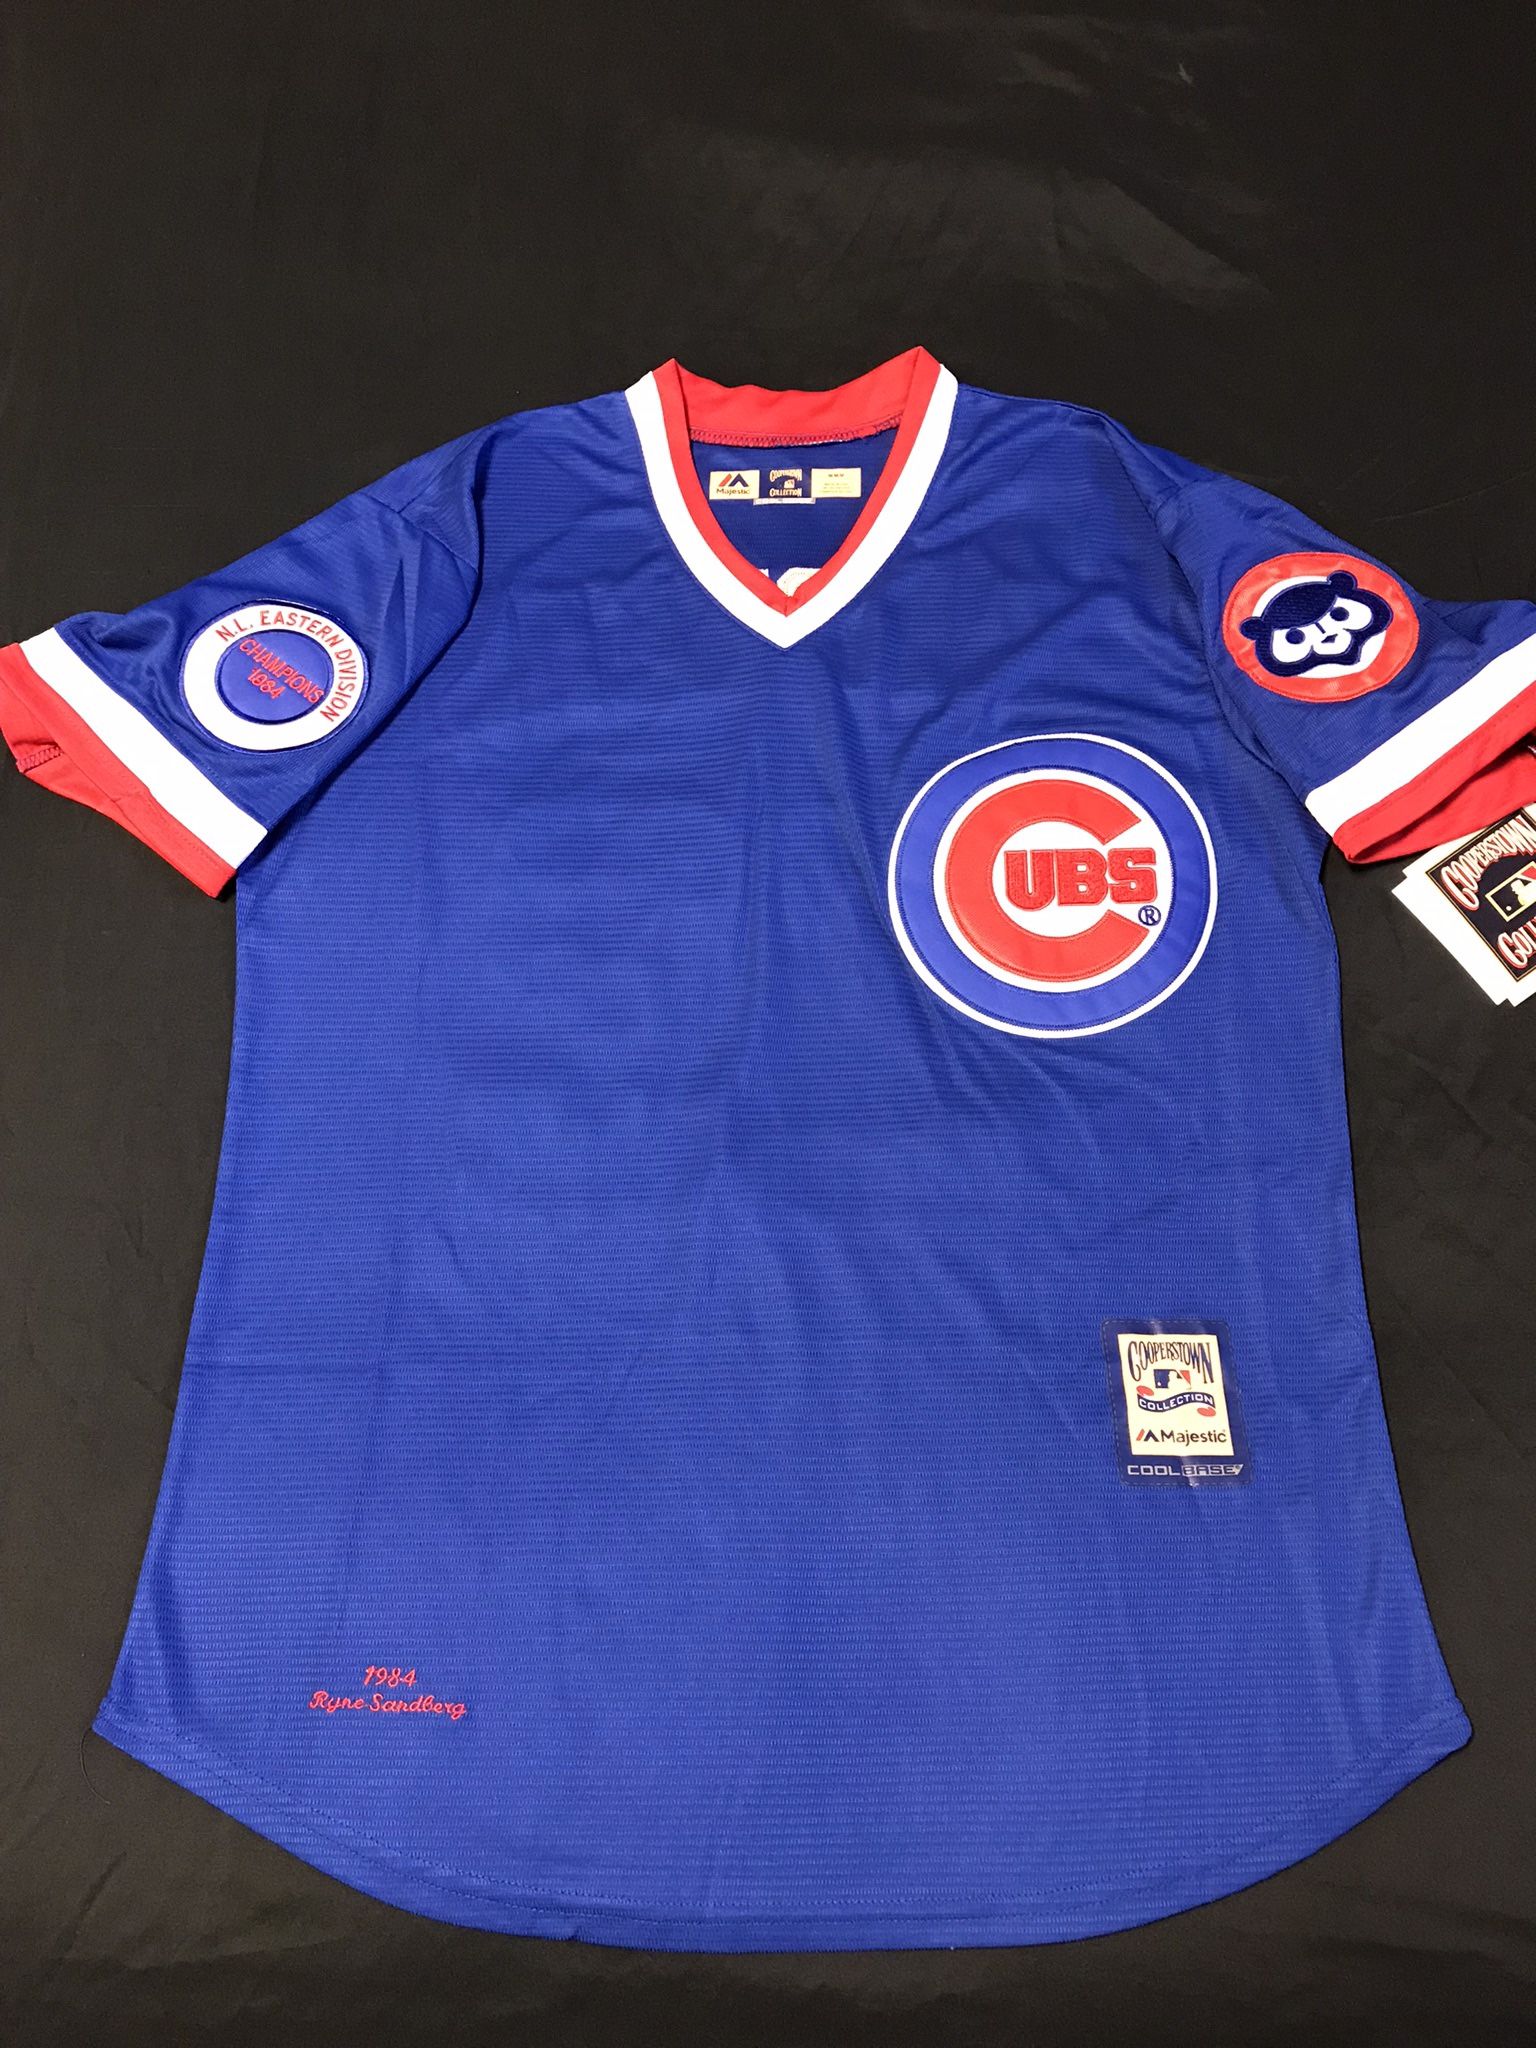 Cubs Sandberg '84 Jersey for Sale in Houston, TX - OfferUp